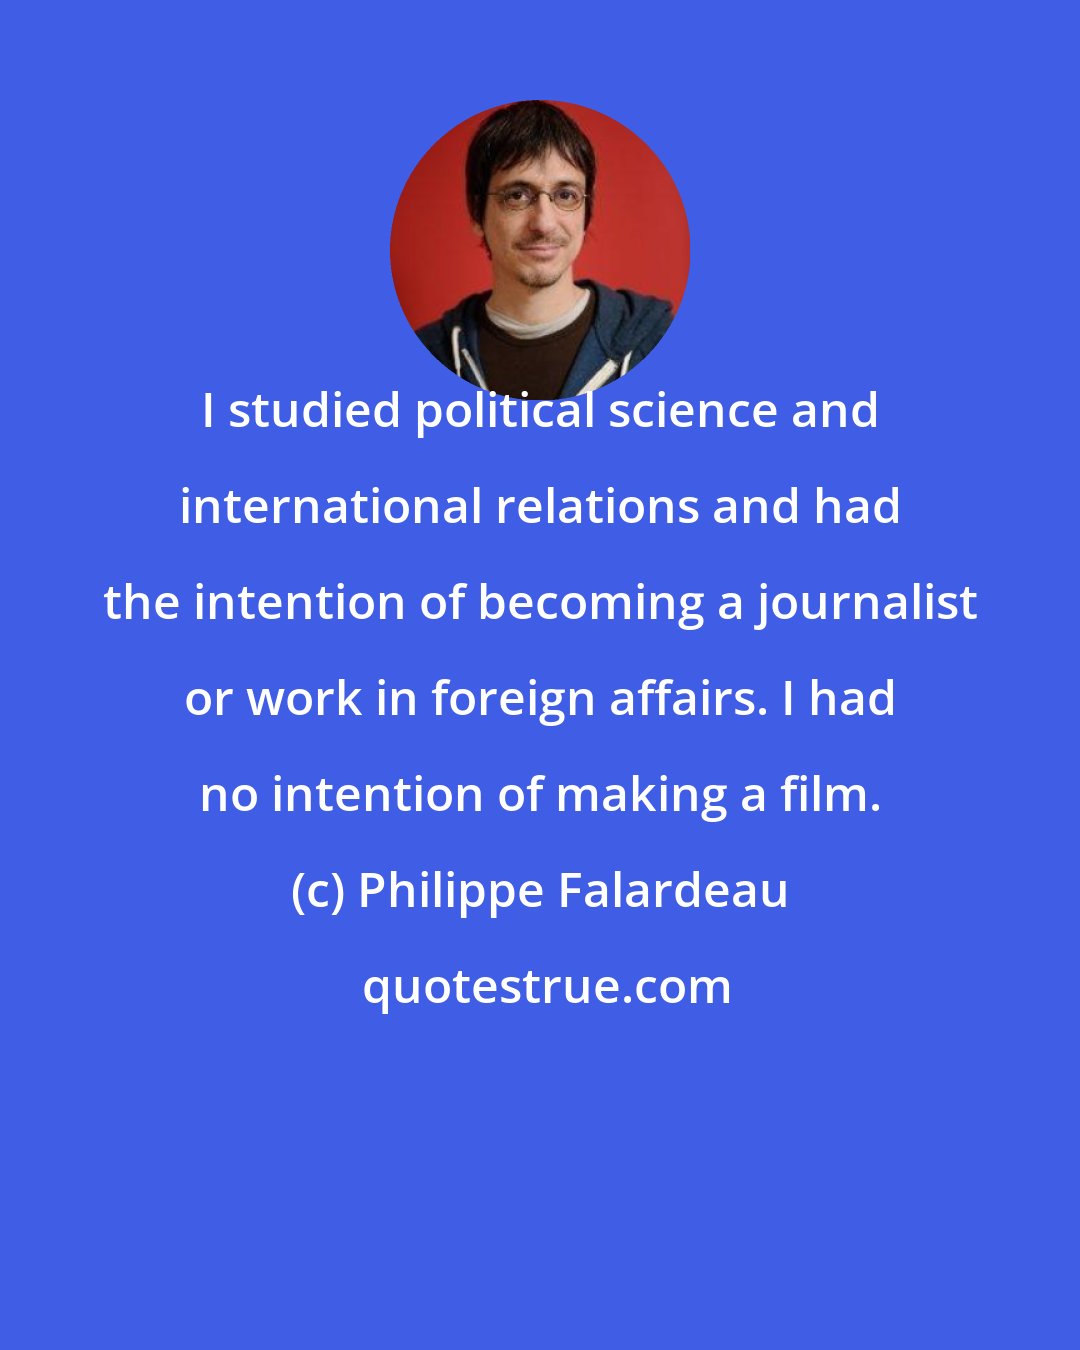 Philippe Falardeau: I studied political science and international relations and had the intention of becoming a journalist or work in foreign affairs. I had no intention of making a film.